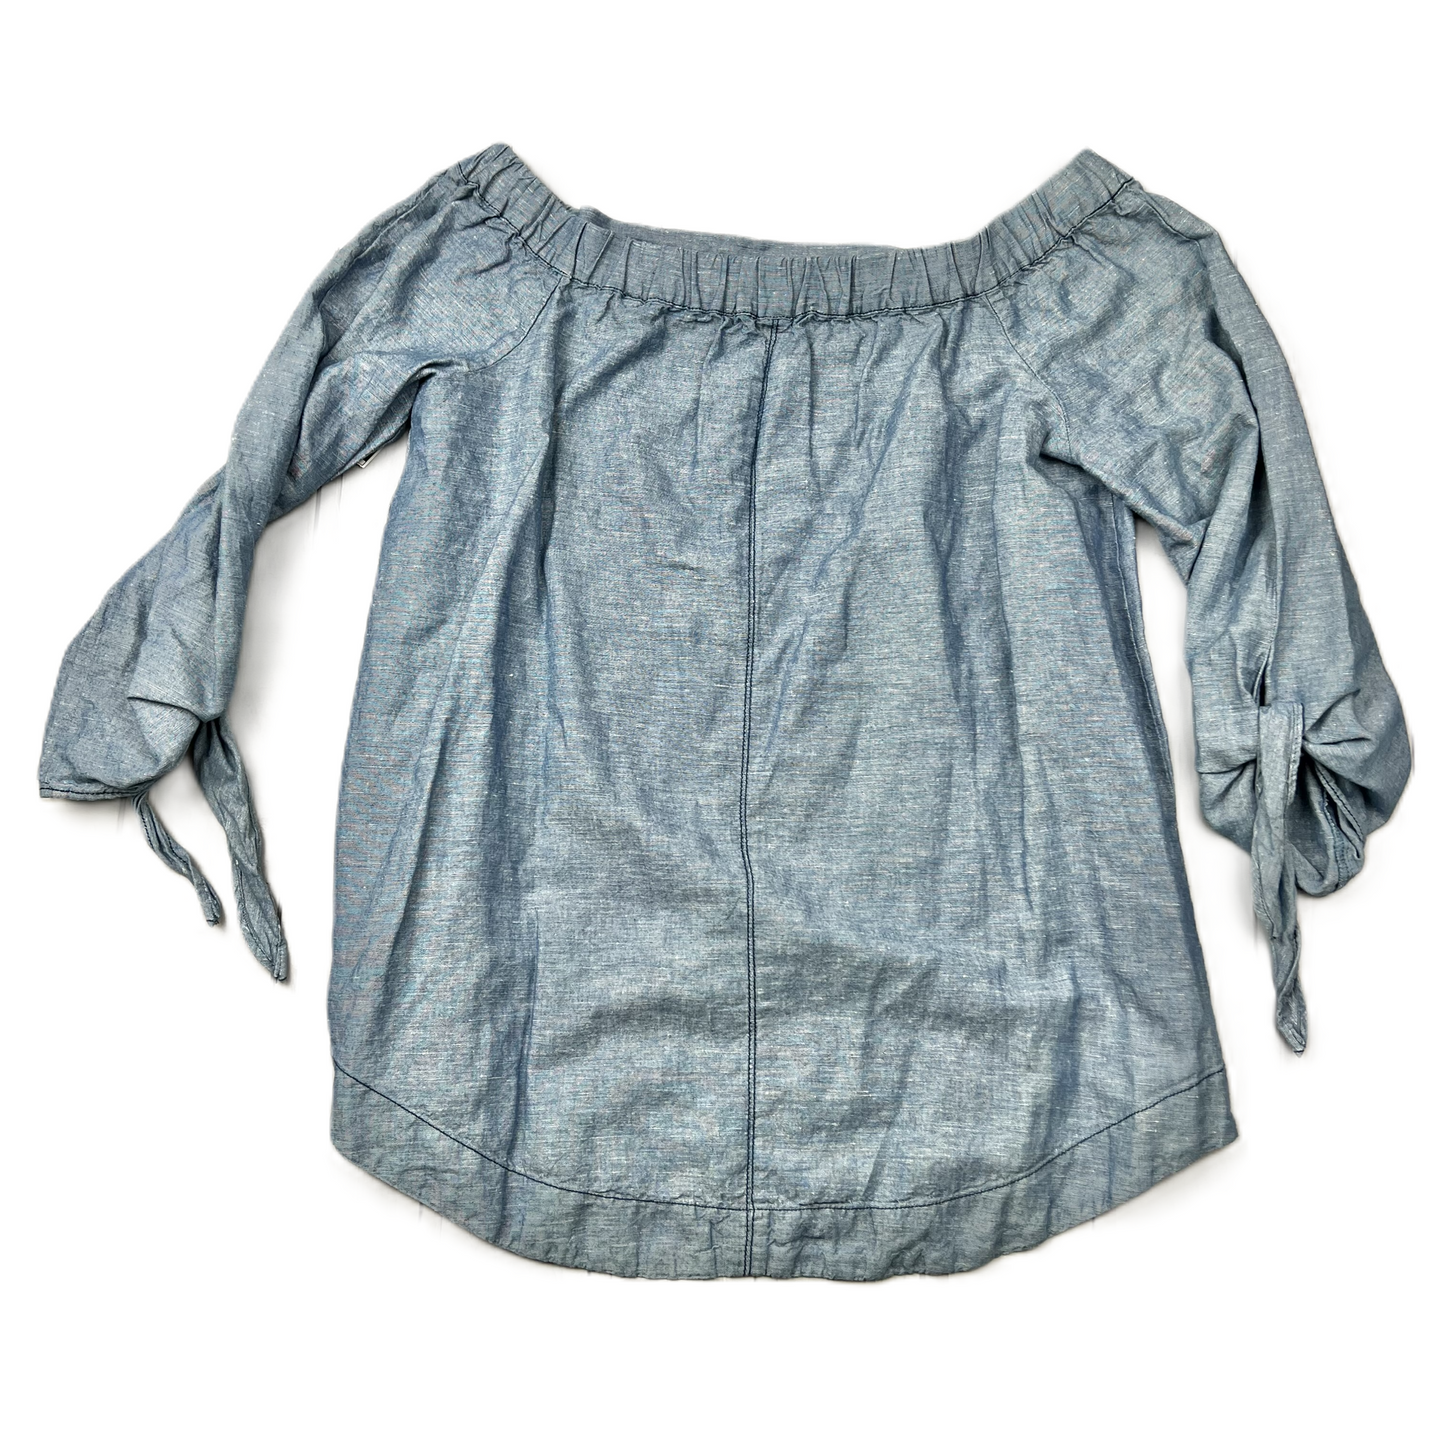 Blue Denim Top 3/4 Sleeve By Free People, Size: S